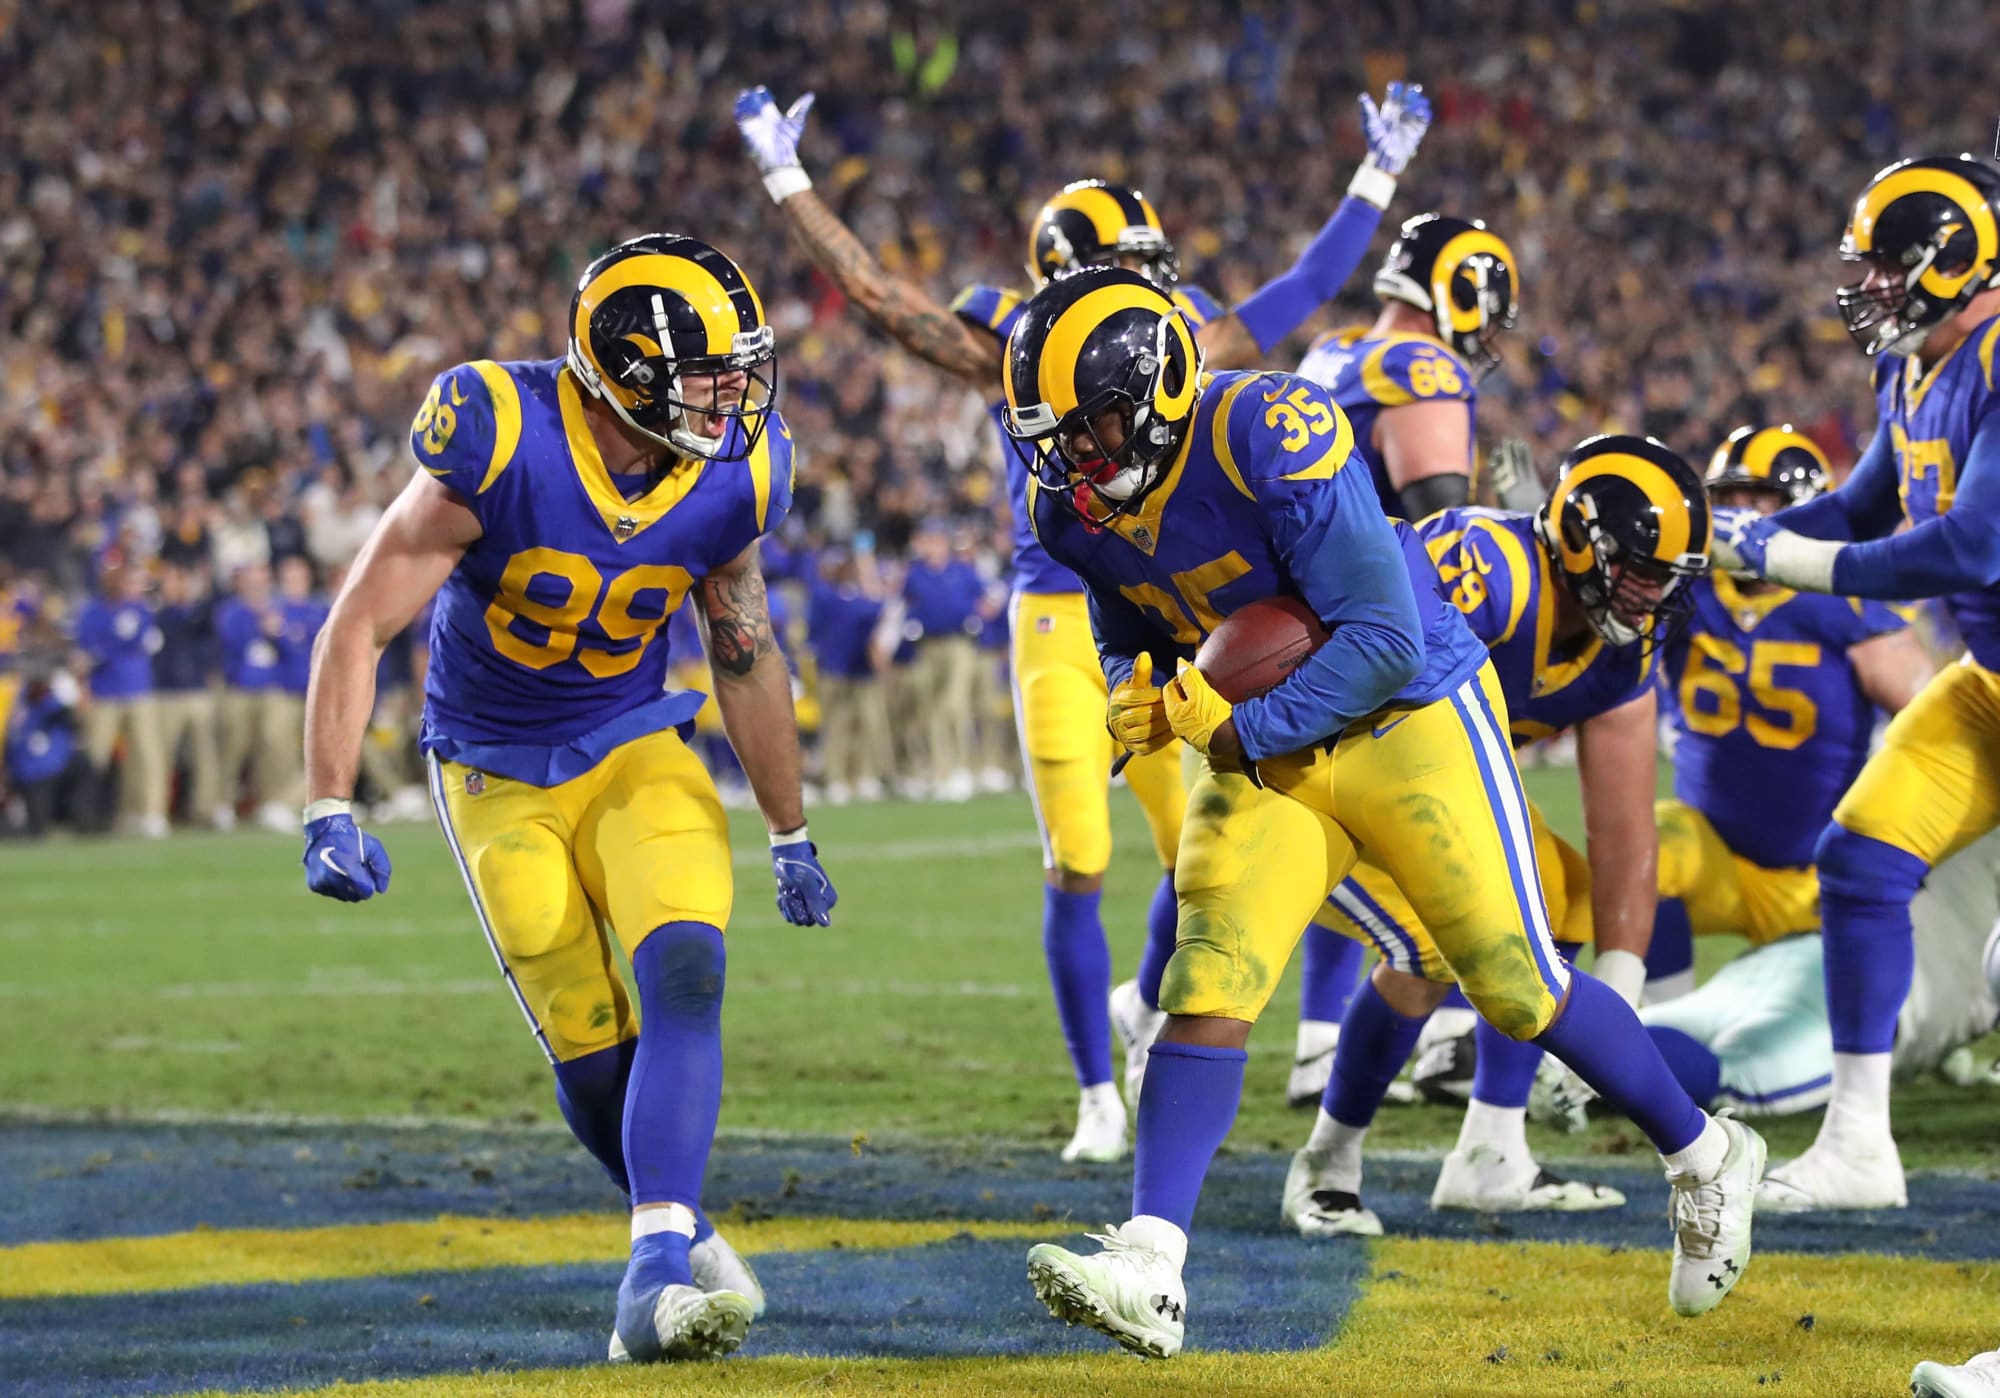 LOS ANGELES, CA - JANUARY 12:  C.J. Anderson #35 of the Los Angeles Rams celebrates with teammates after a 1 yard touchdown run in the fourth quarter against the Dallas Cowboys in the NFC Divisional Playoff game at Los Angeles Memorial Coliseum on January 12, 2019 in Los Angeles, California.  (Photo by Sean M. Haffey/Getty Images)